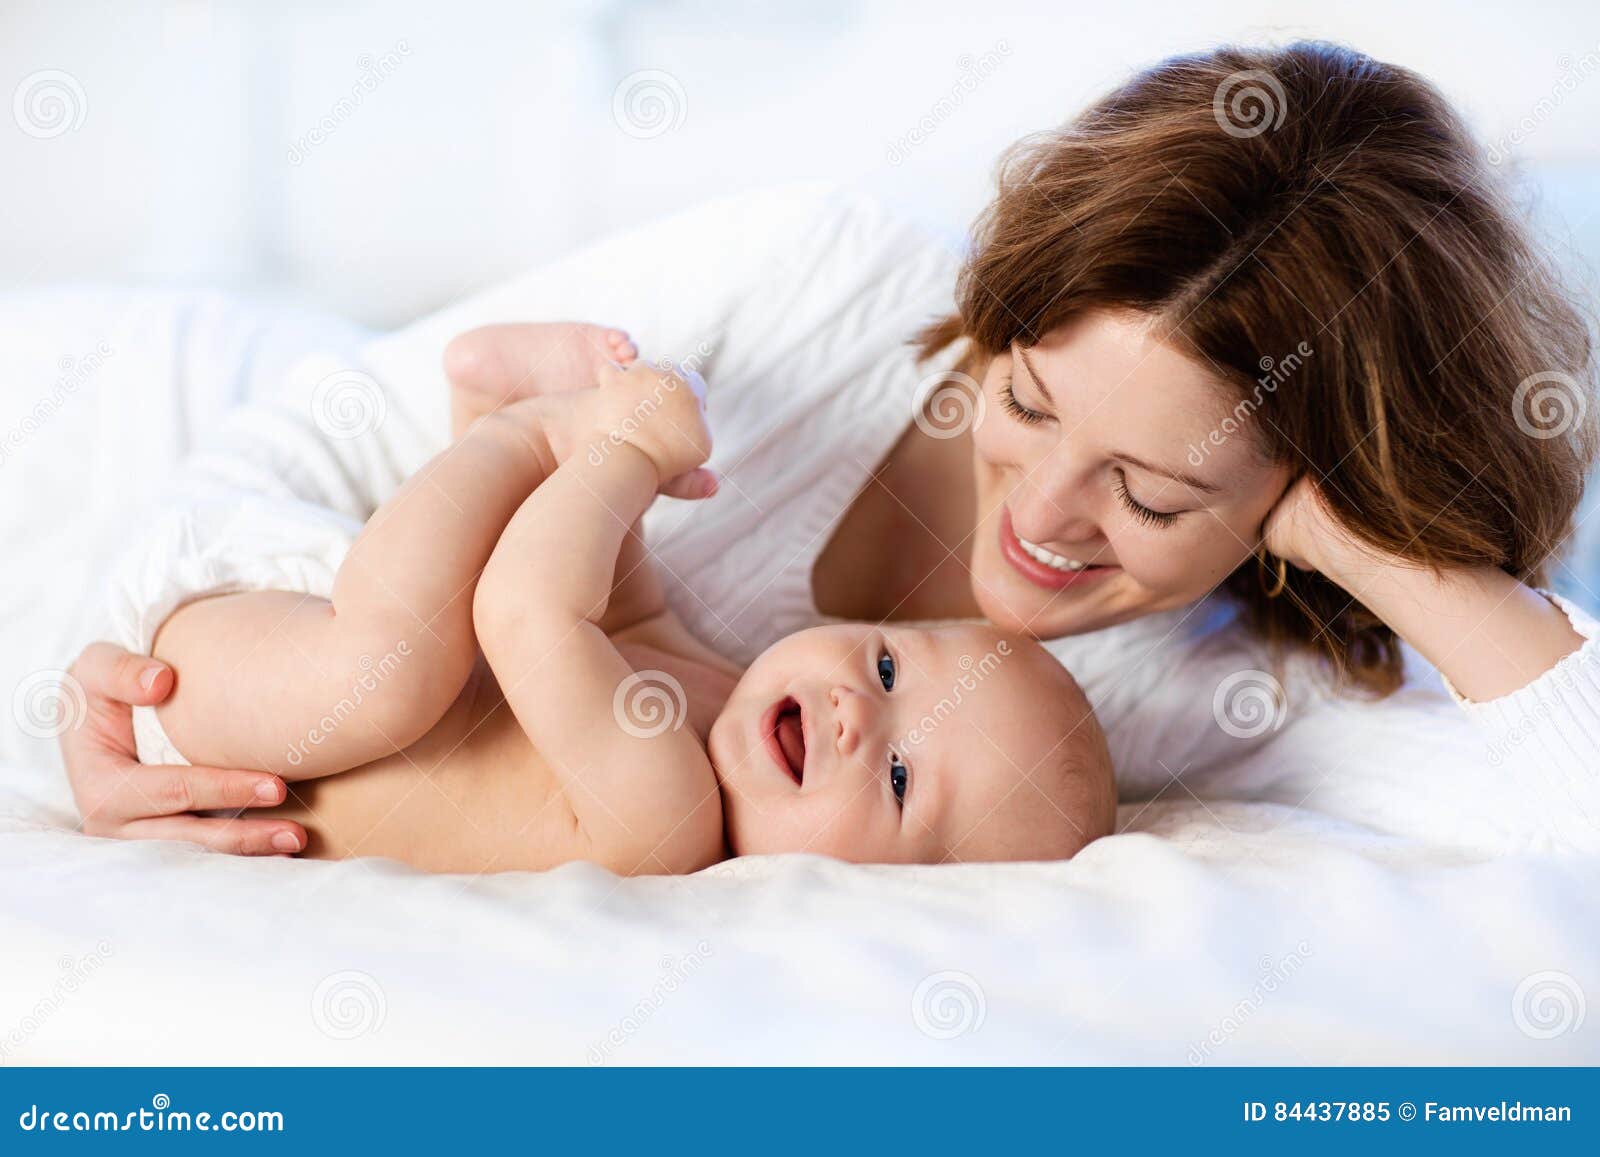 baby and mother at home. mom and child.